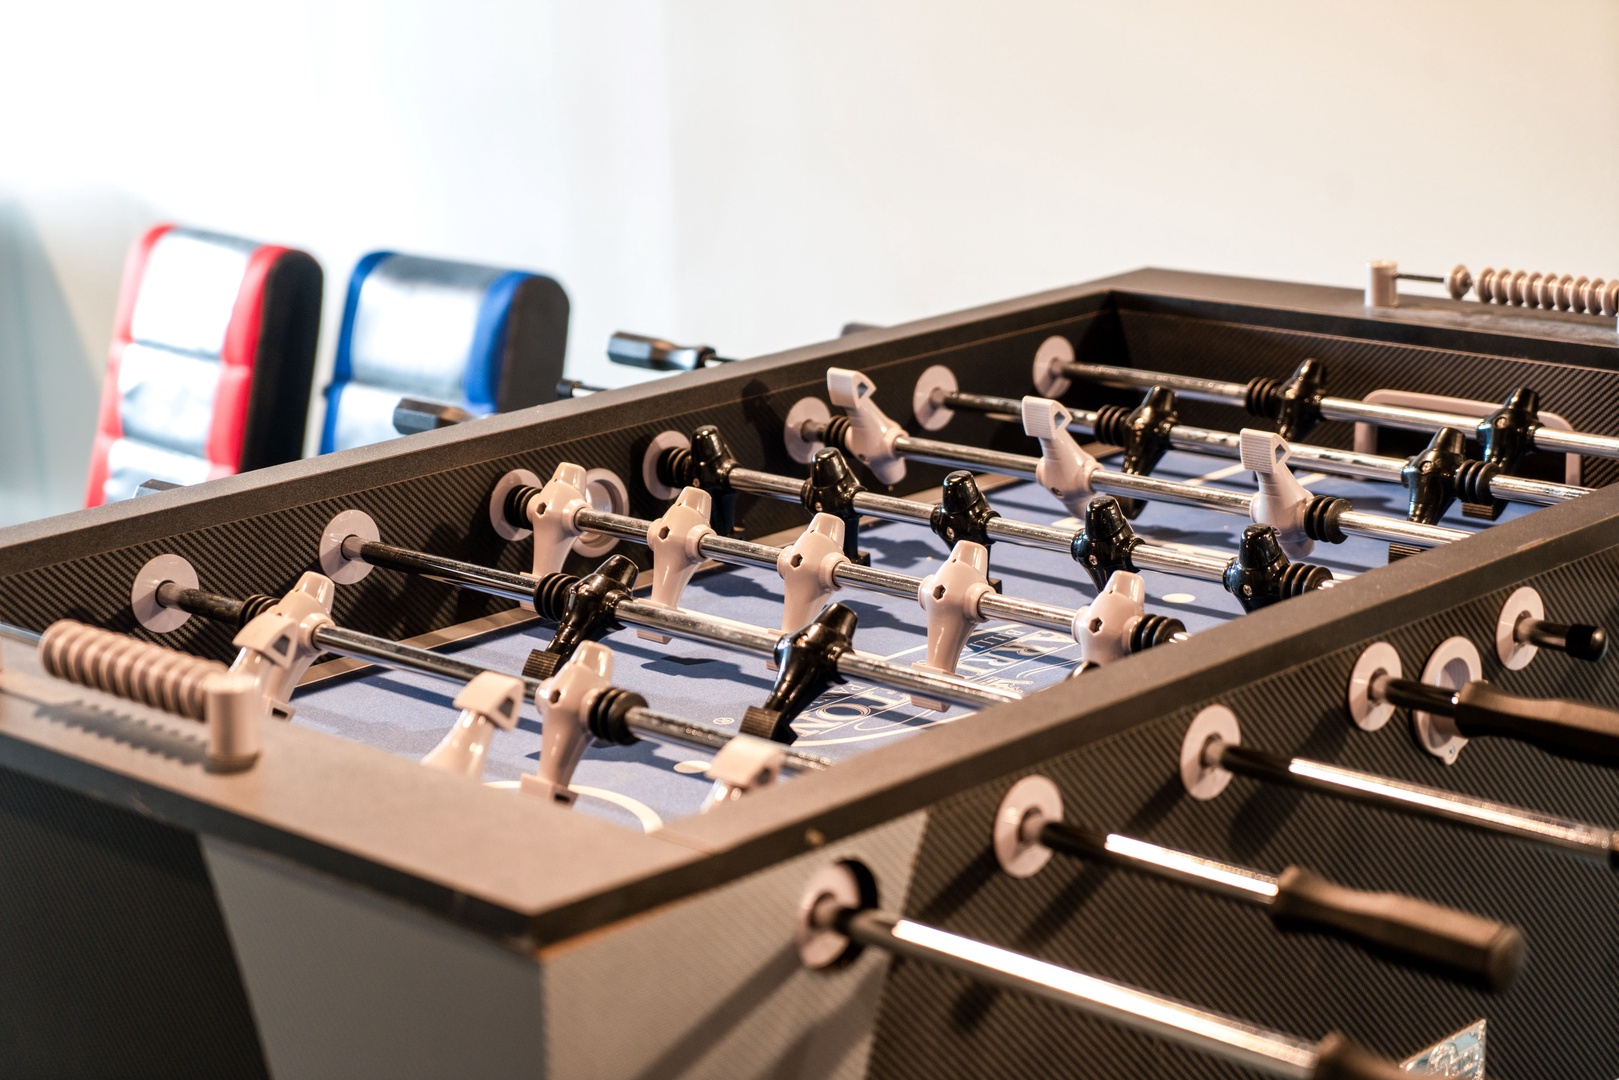 Get competitive in the lower-level game room with a round of foosball